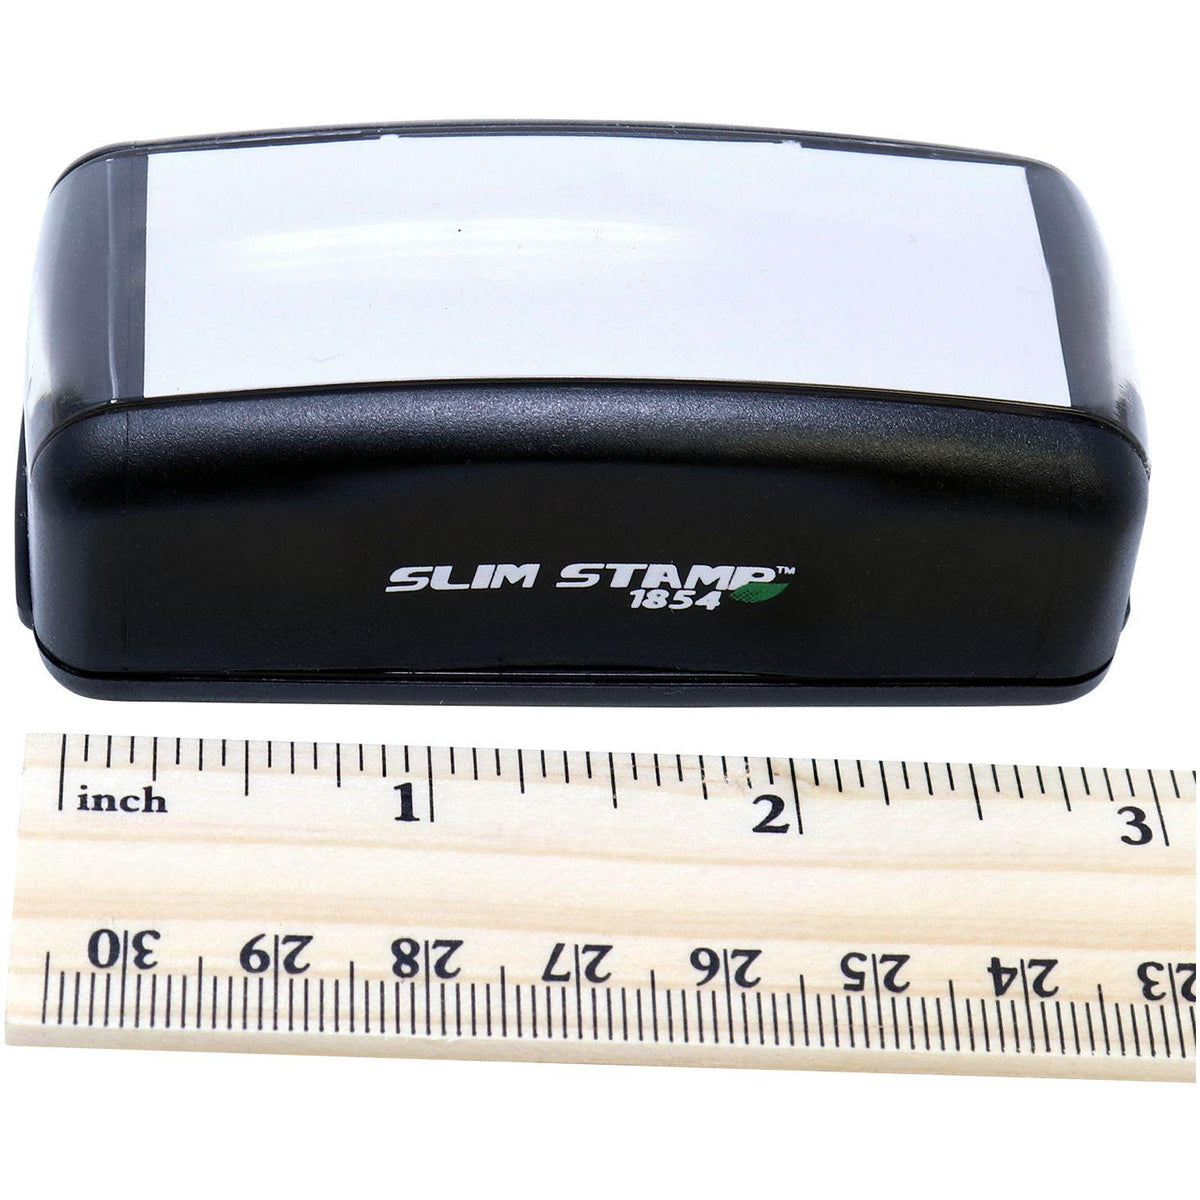 Measurement Large Pre-Inked Global Express Guaranteed Stamp with Ruler